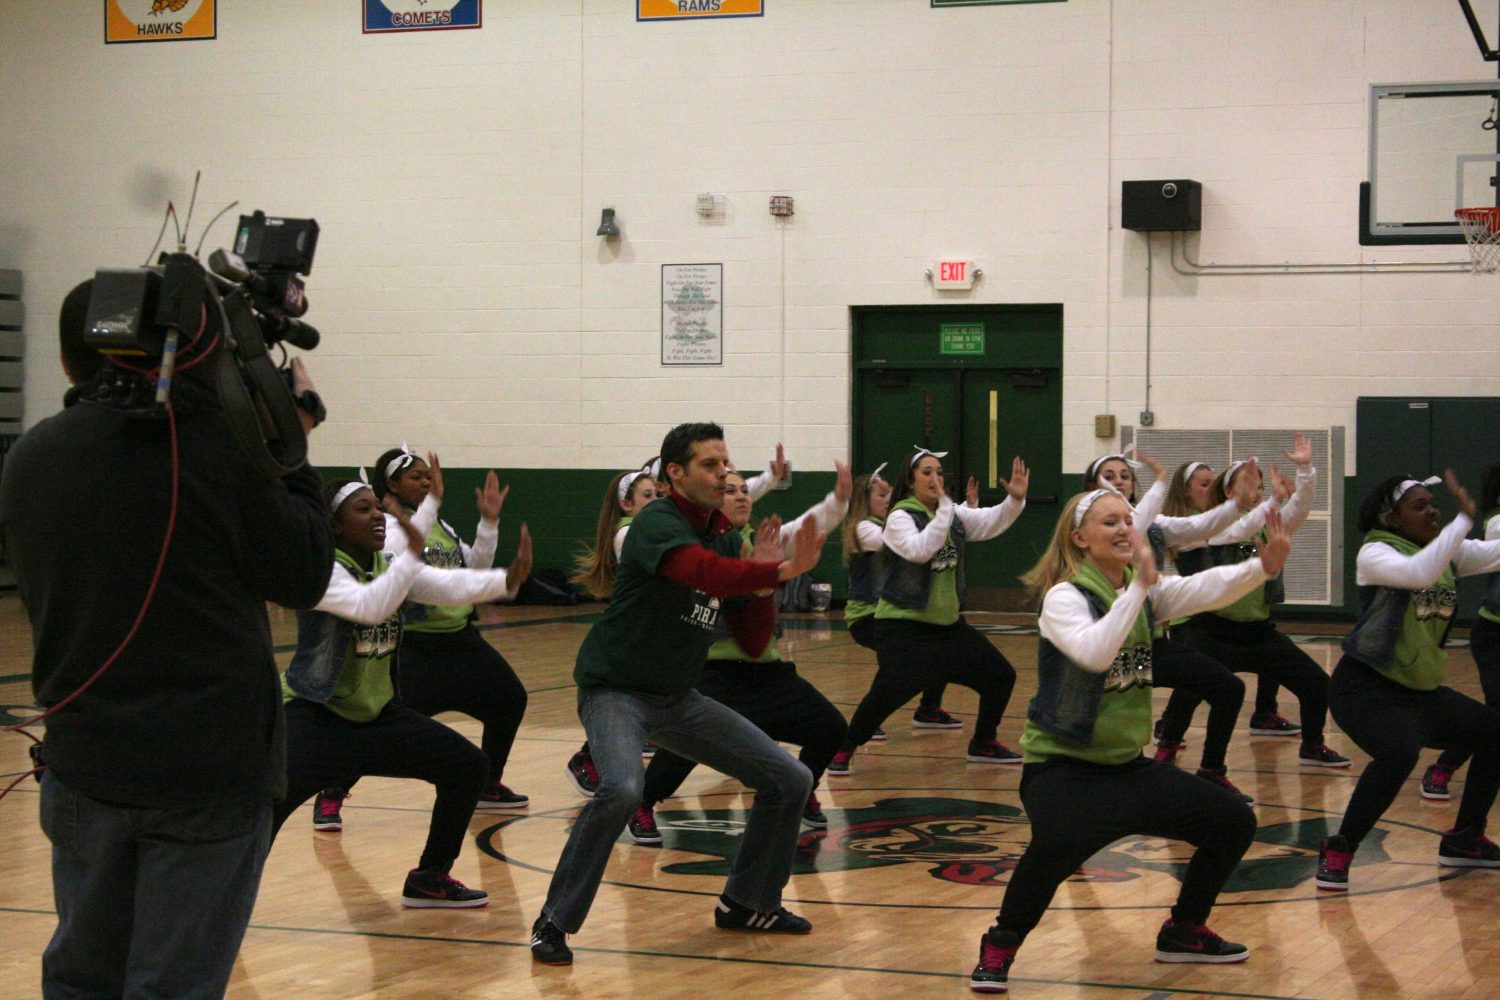 Drill Team featured on Fox 2 News with Tim Ezell